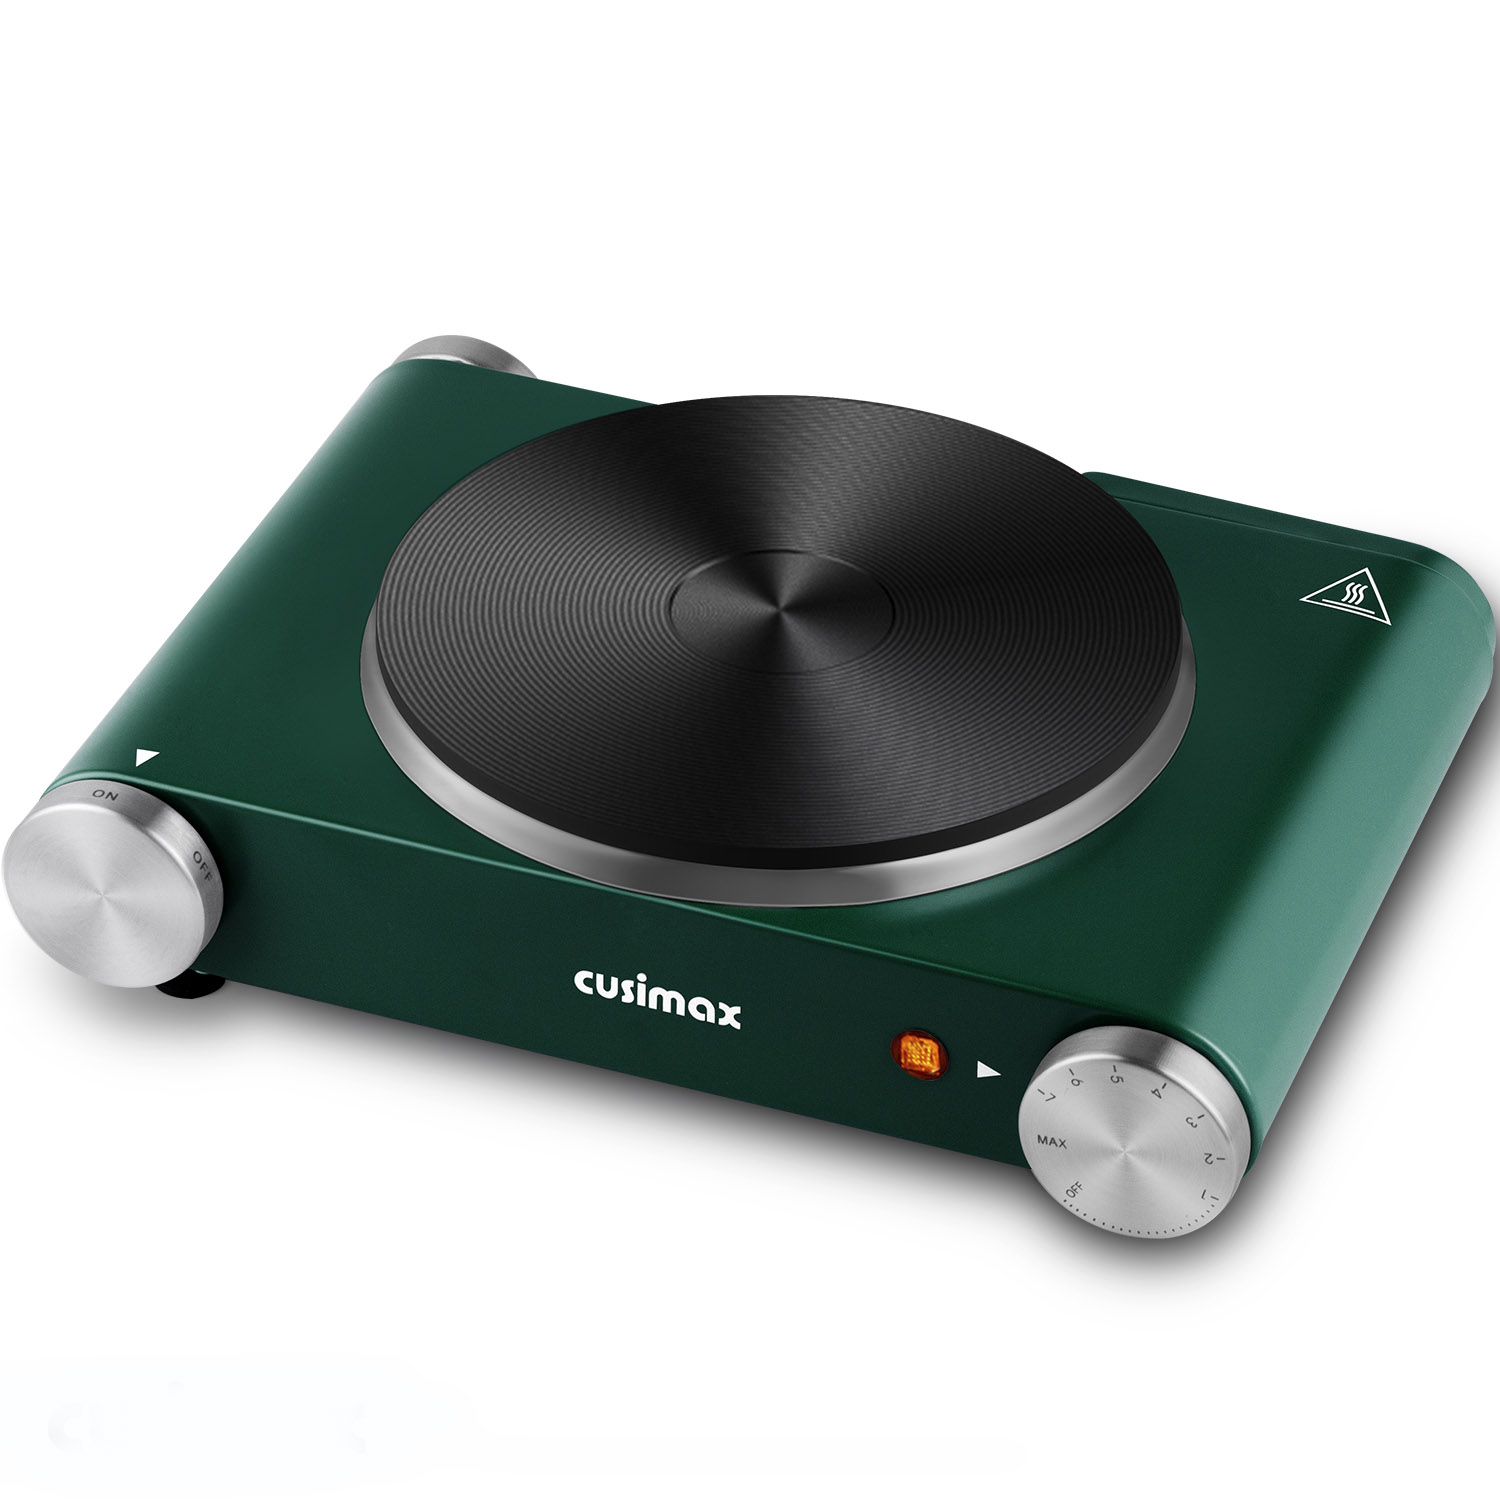 Cusimax 1500W Portable Hot Plate Review: A Useful Spare Burner